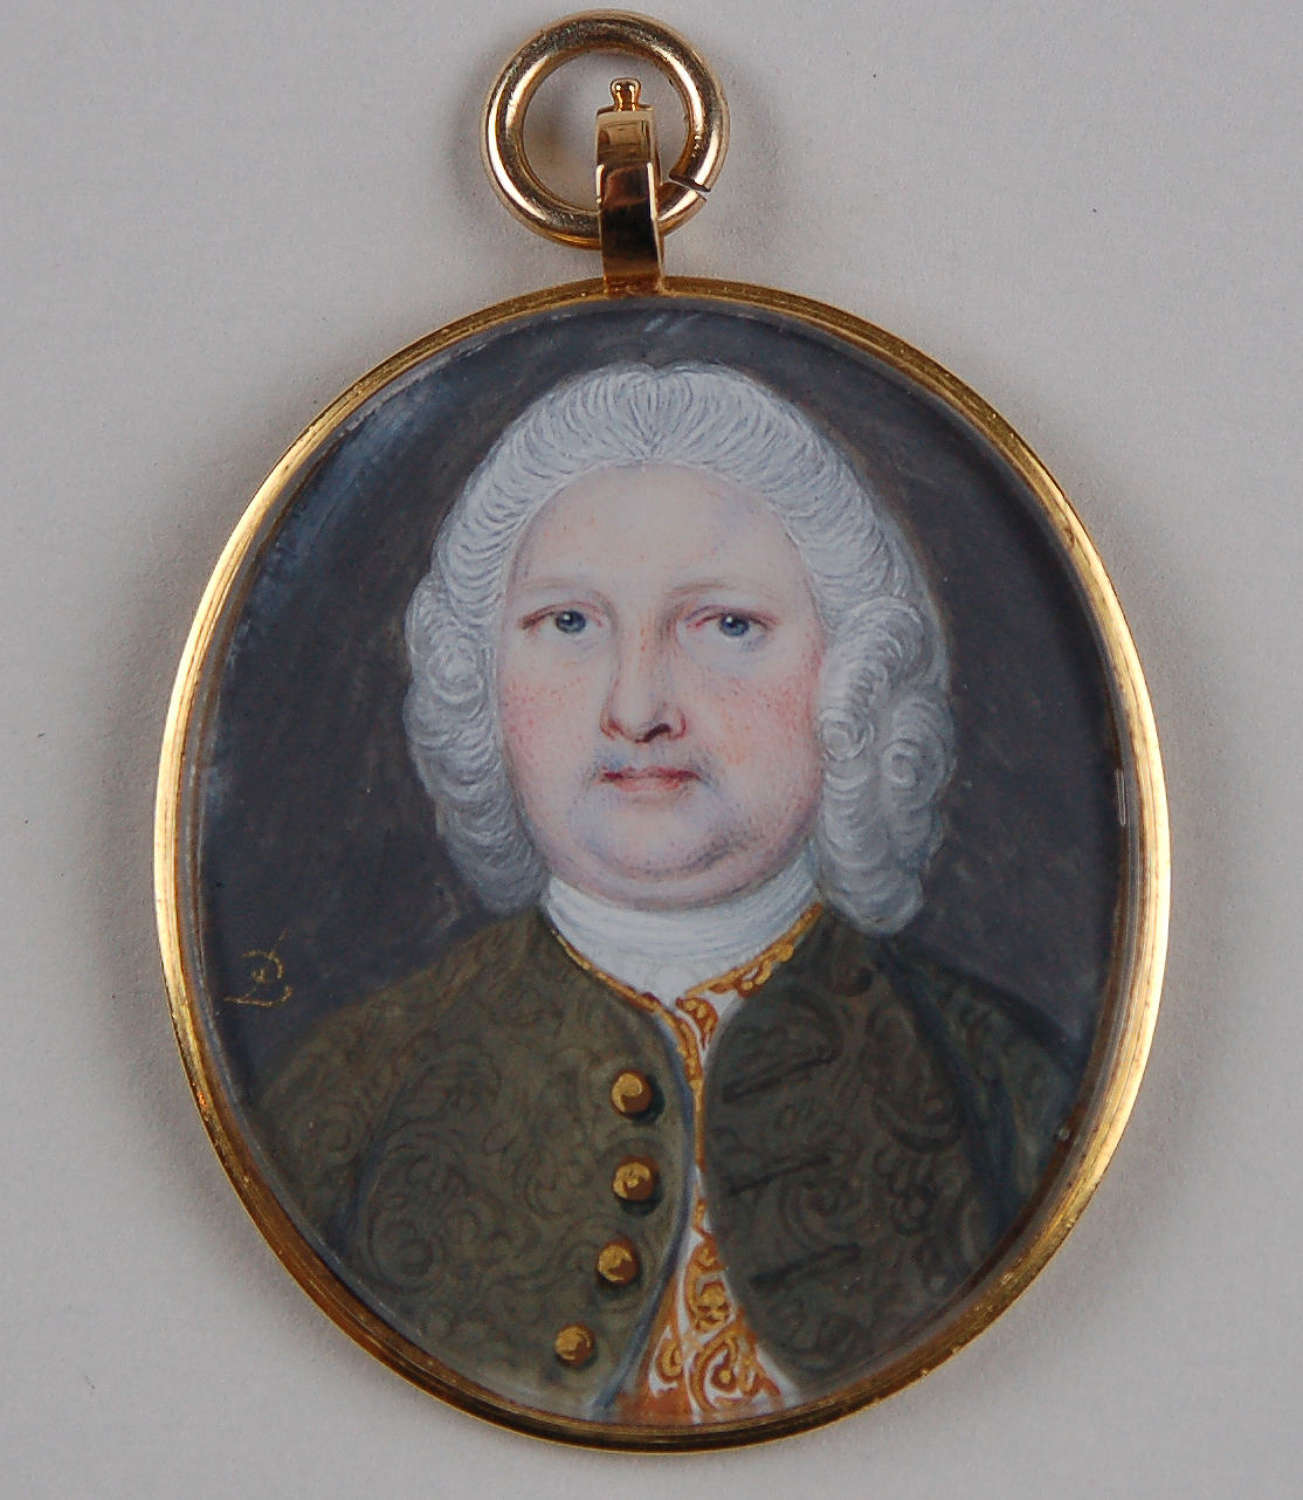 Gent signed by Peter Paul Lens C1730